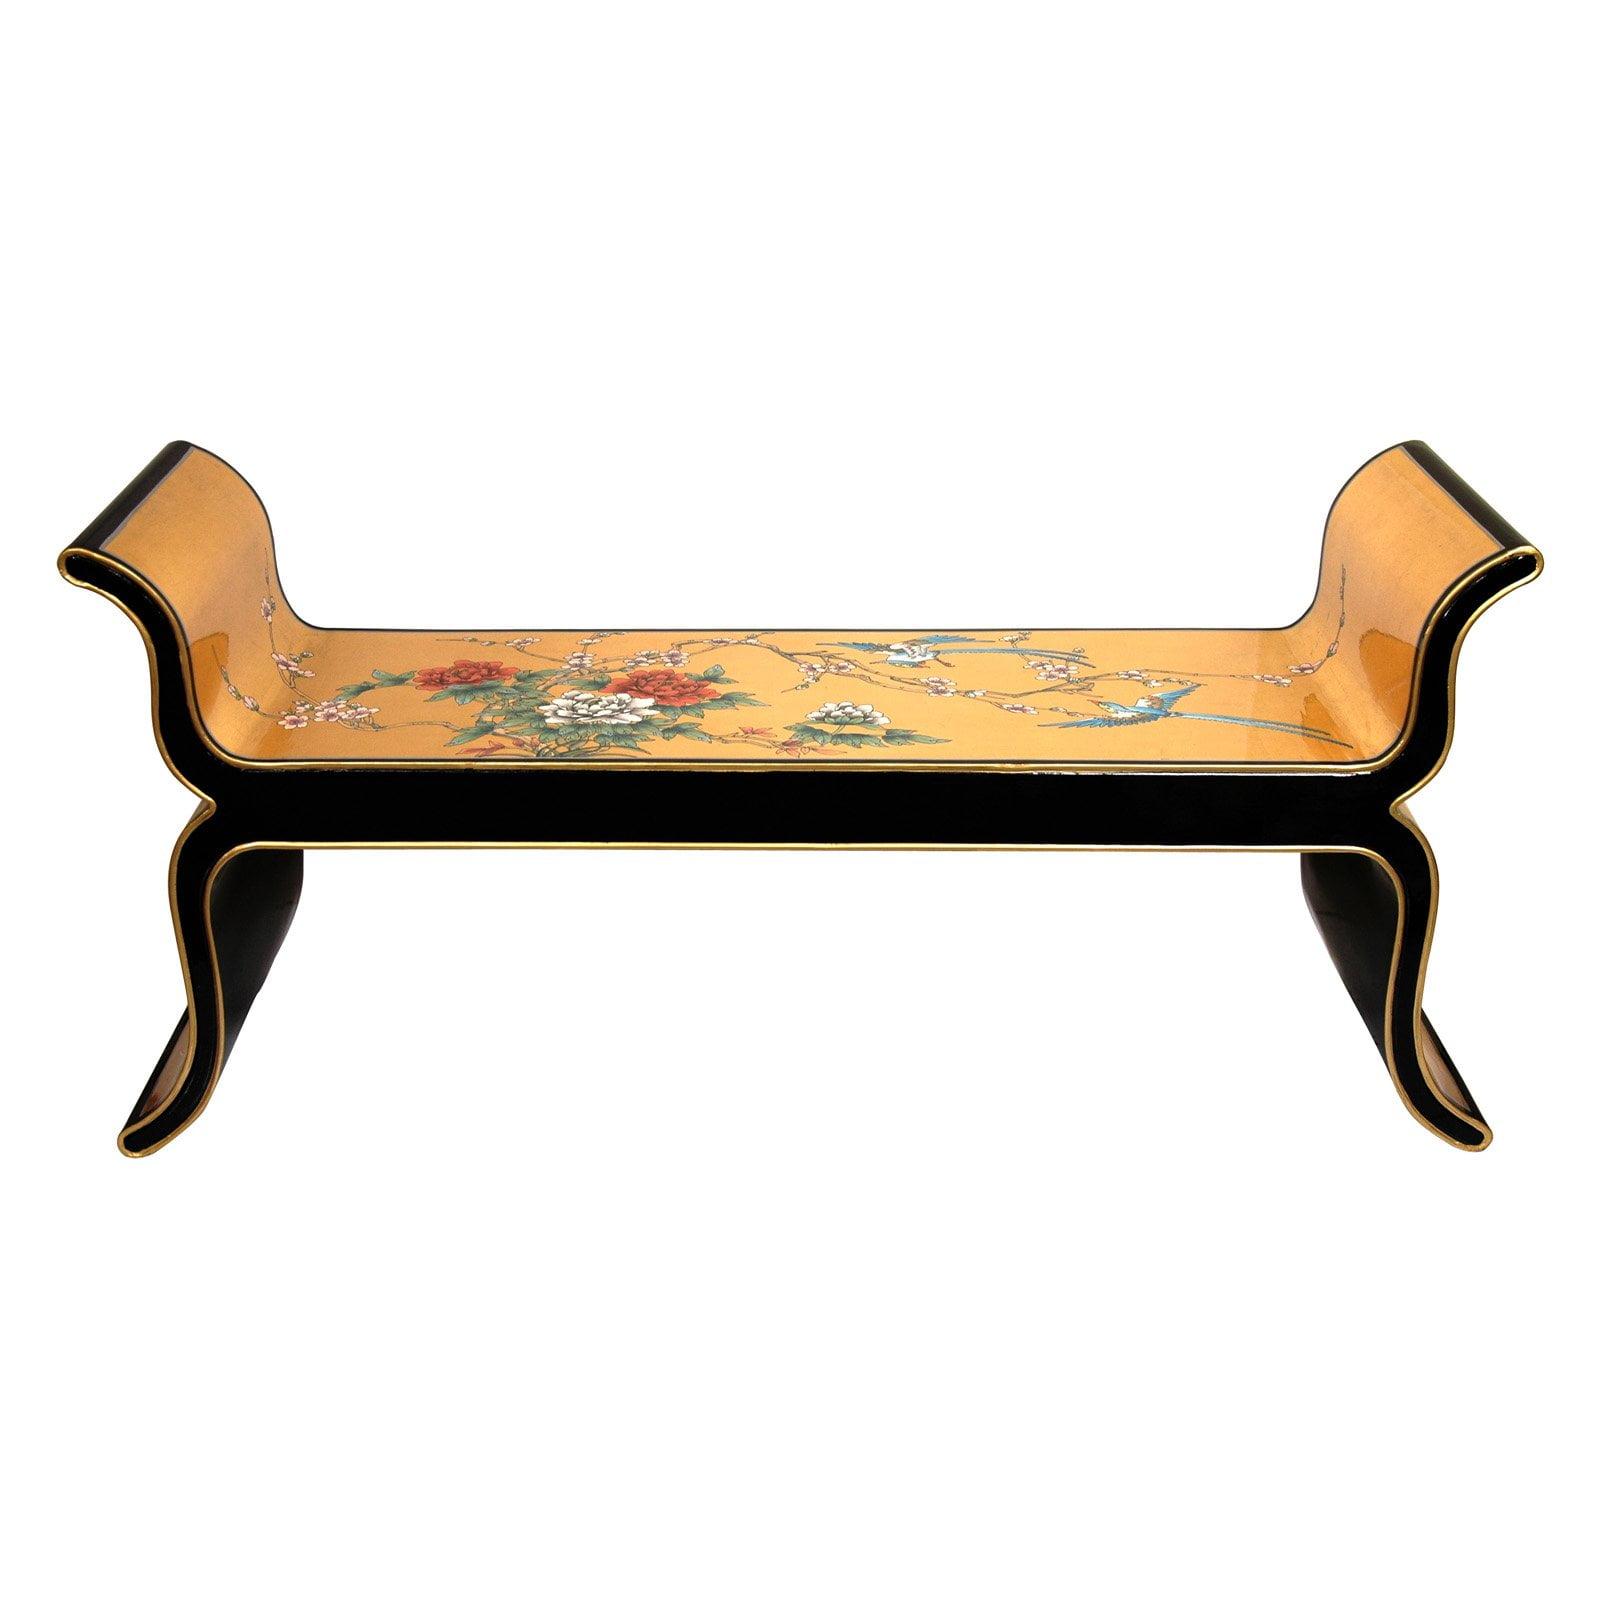 Oriental Gold Leaf Hand-Painted Birds & Flowers Solid Wood Bench